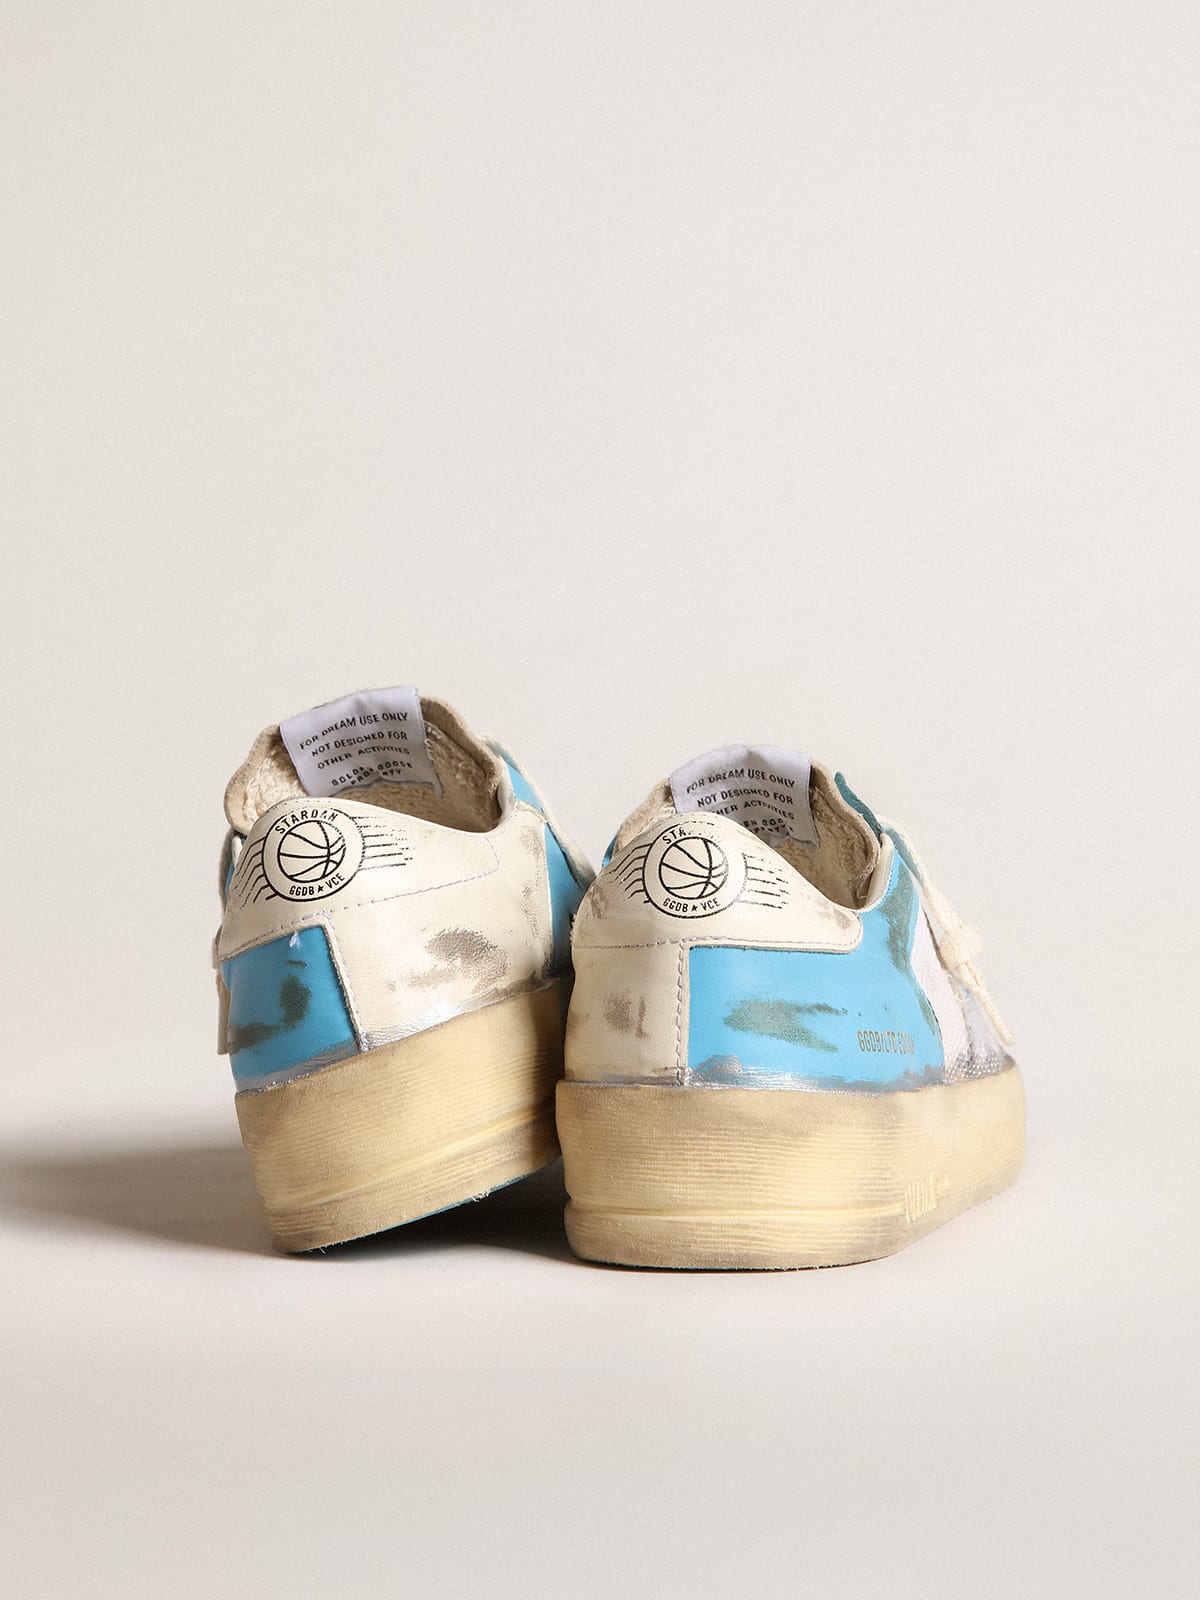 Golden Goose - Women's Stardan LAB in light blue nappa leather and white mesh in 